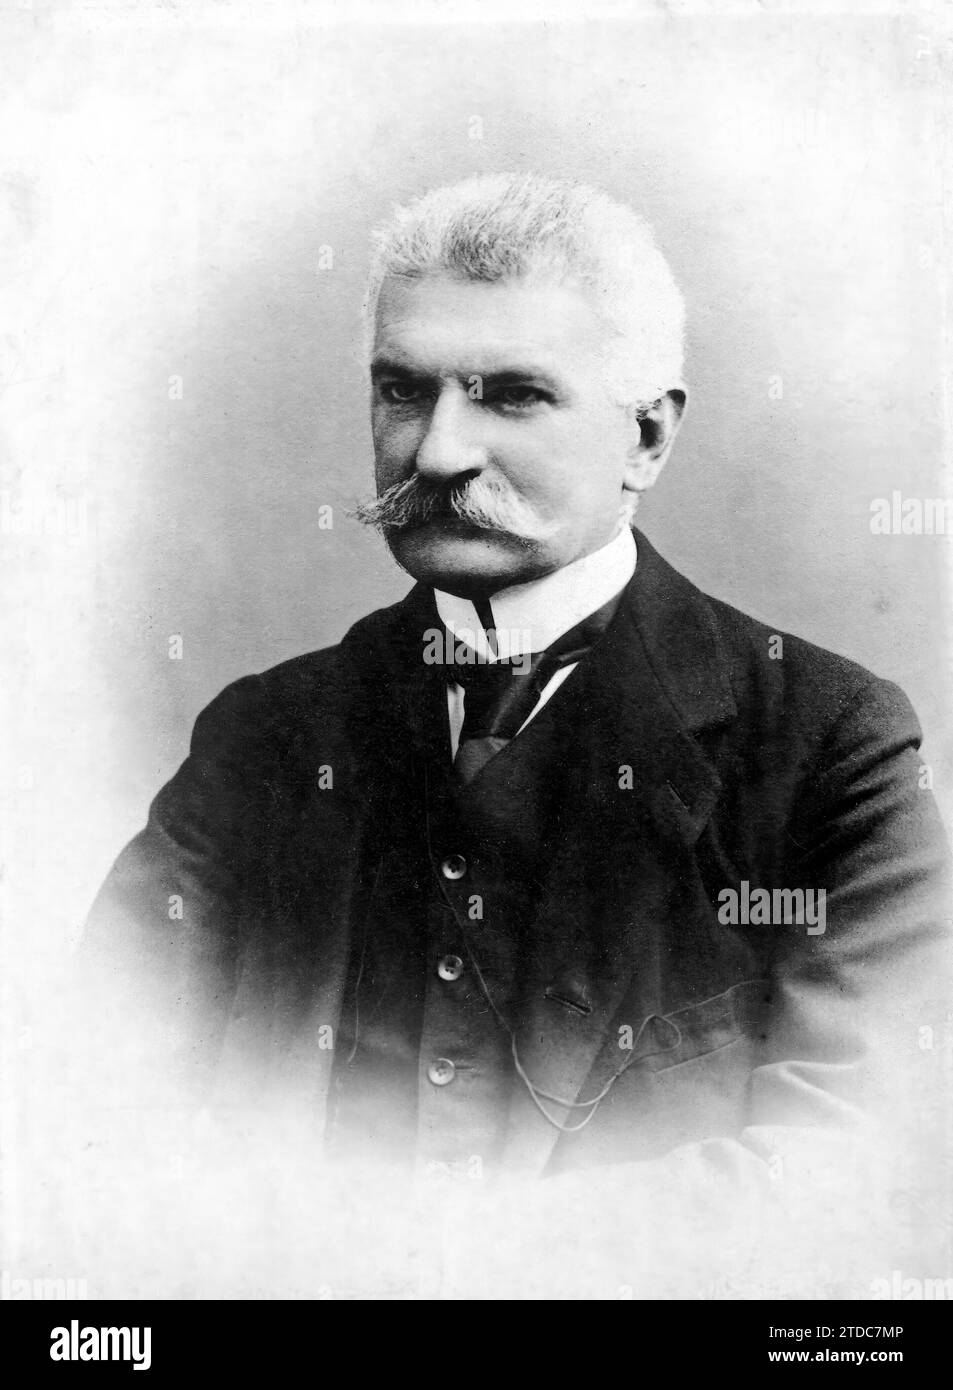 12/09/1909. Mr. Sonnino, new president of the Council of Ministers of Italy. Photo: Argus. Credit: Album / Archivo ABC / Argus Stock Photo